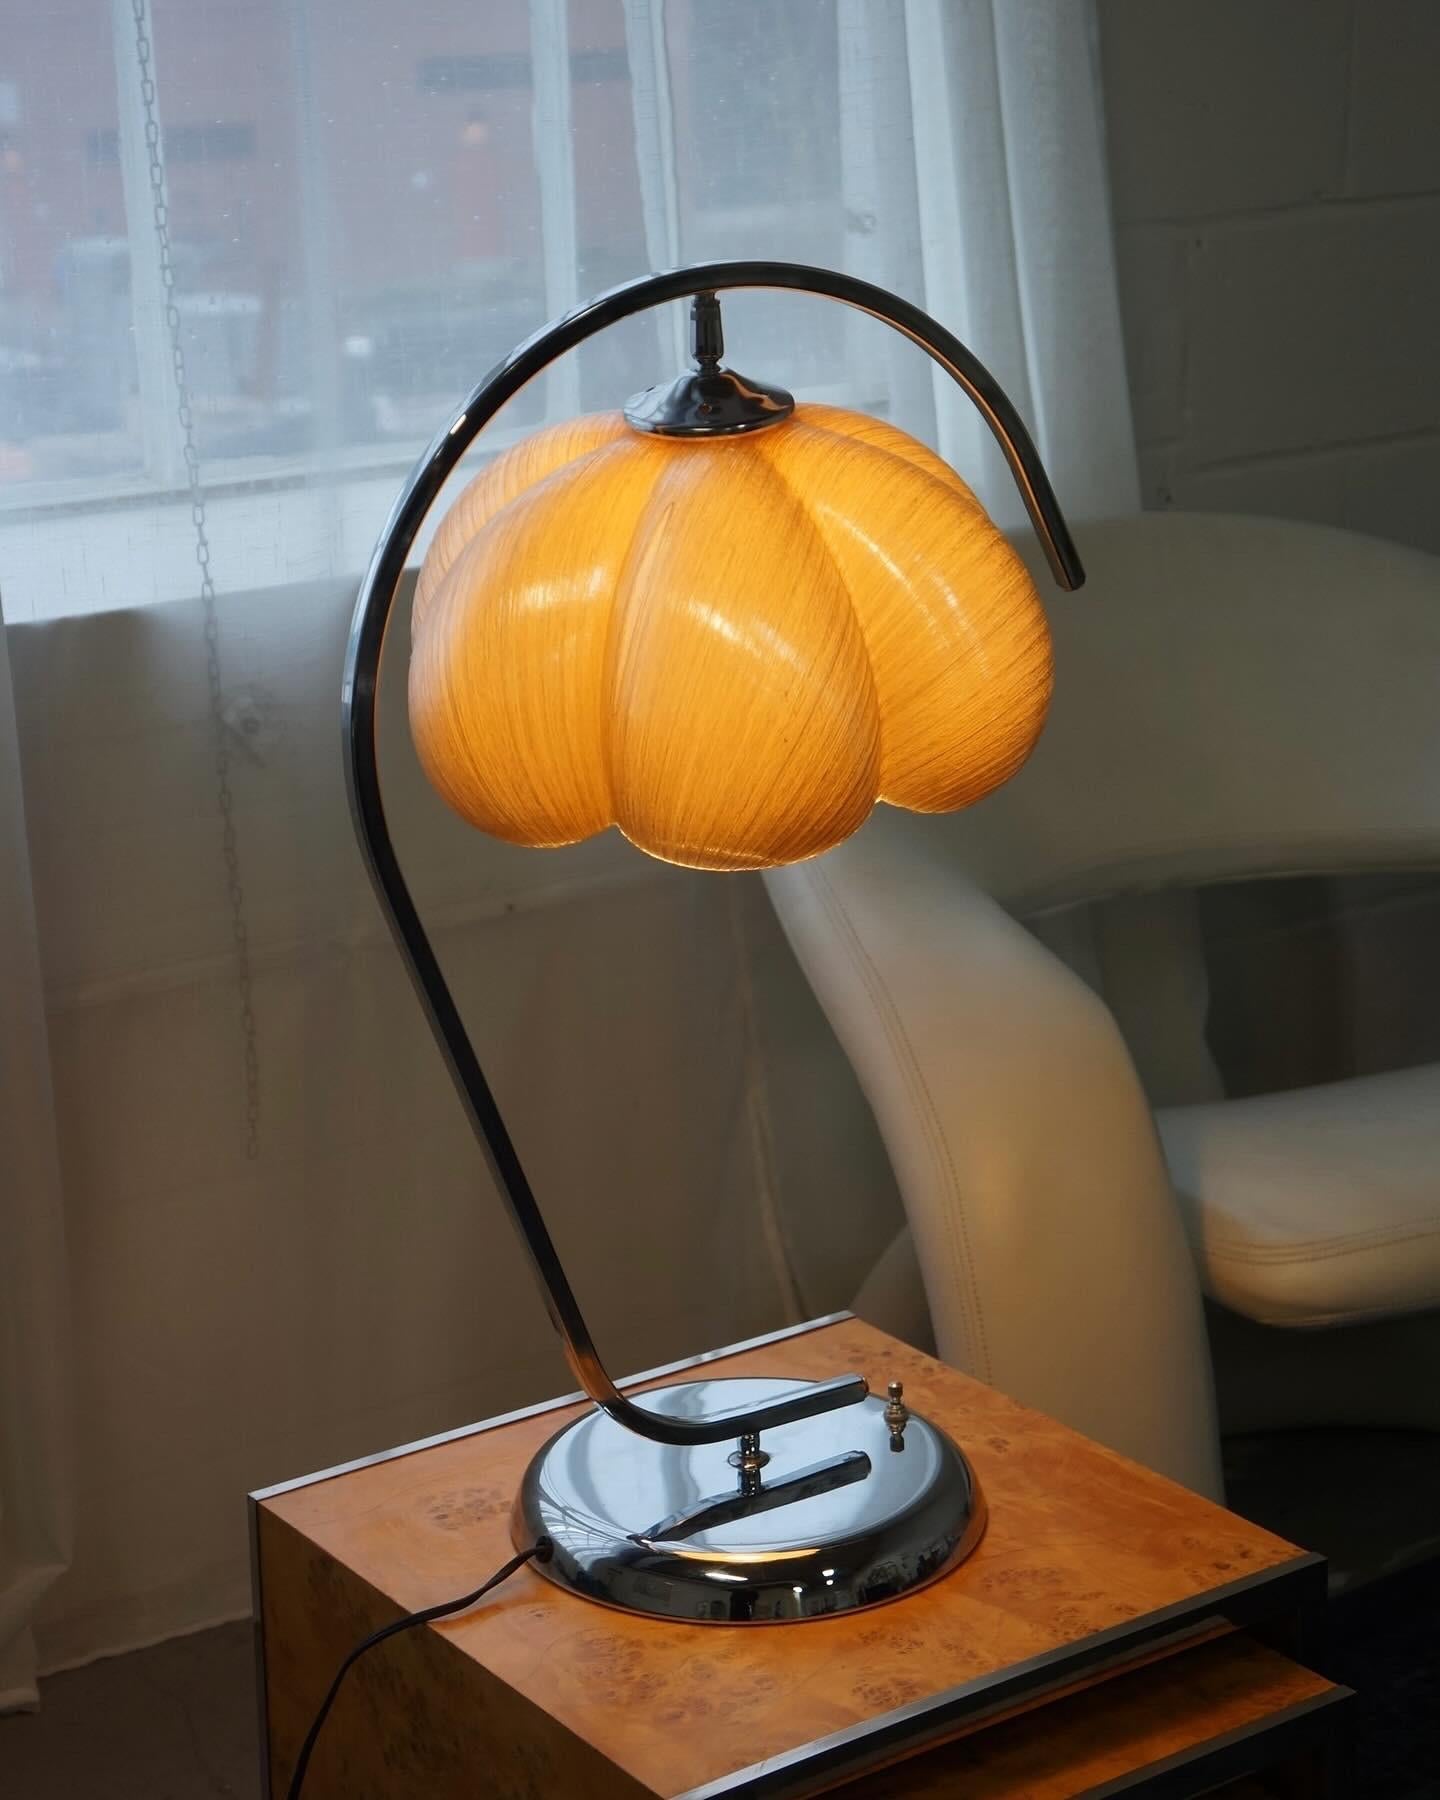 Stunning and unique fibreglass and chrome table lamp from the 1970s. This spectacular table lamp has a curvature to its body with an arch top which seemingly wraps around the shade. The shade is a fiberglass in a soft and muted grey, light yellow